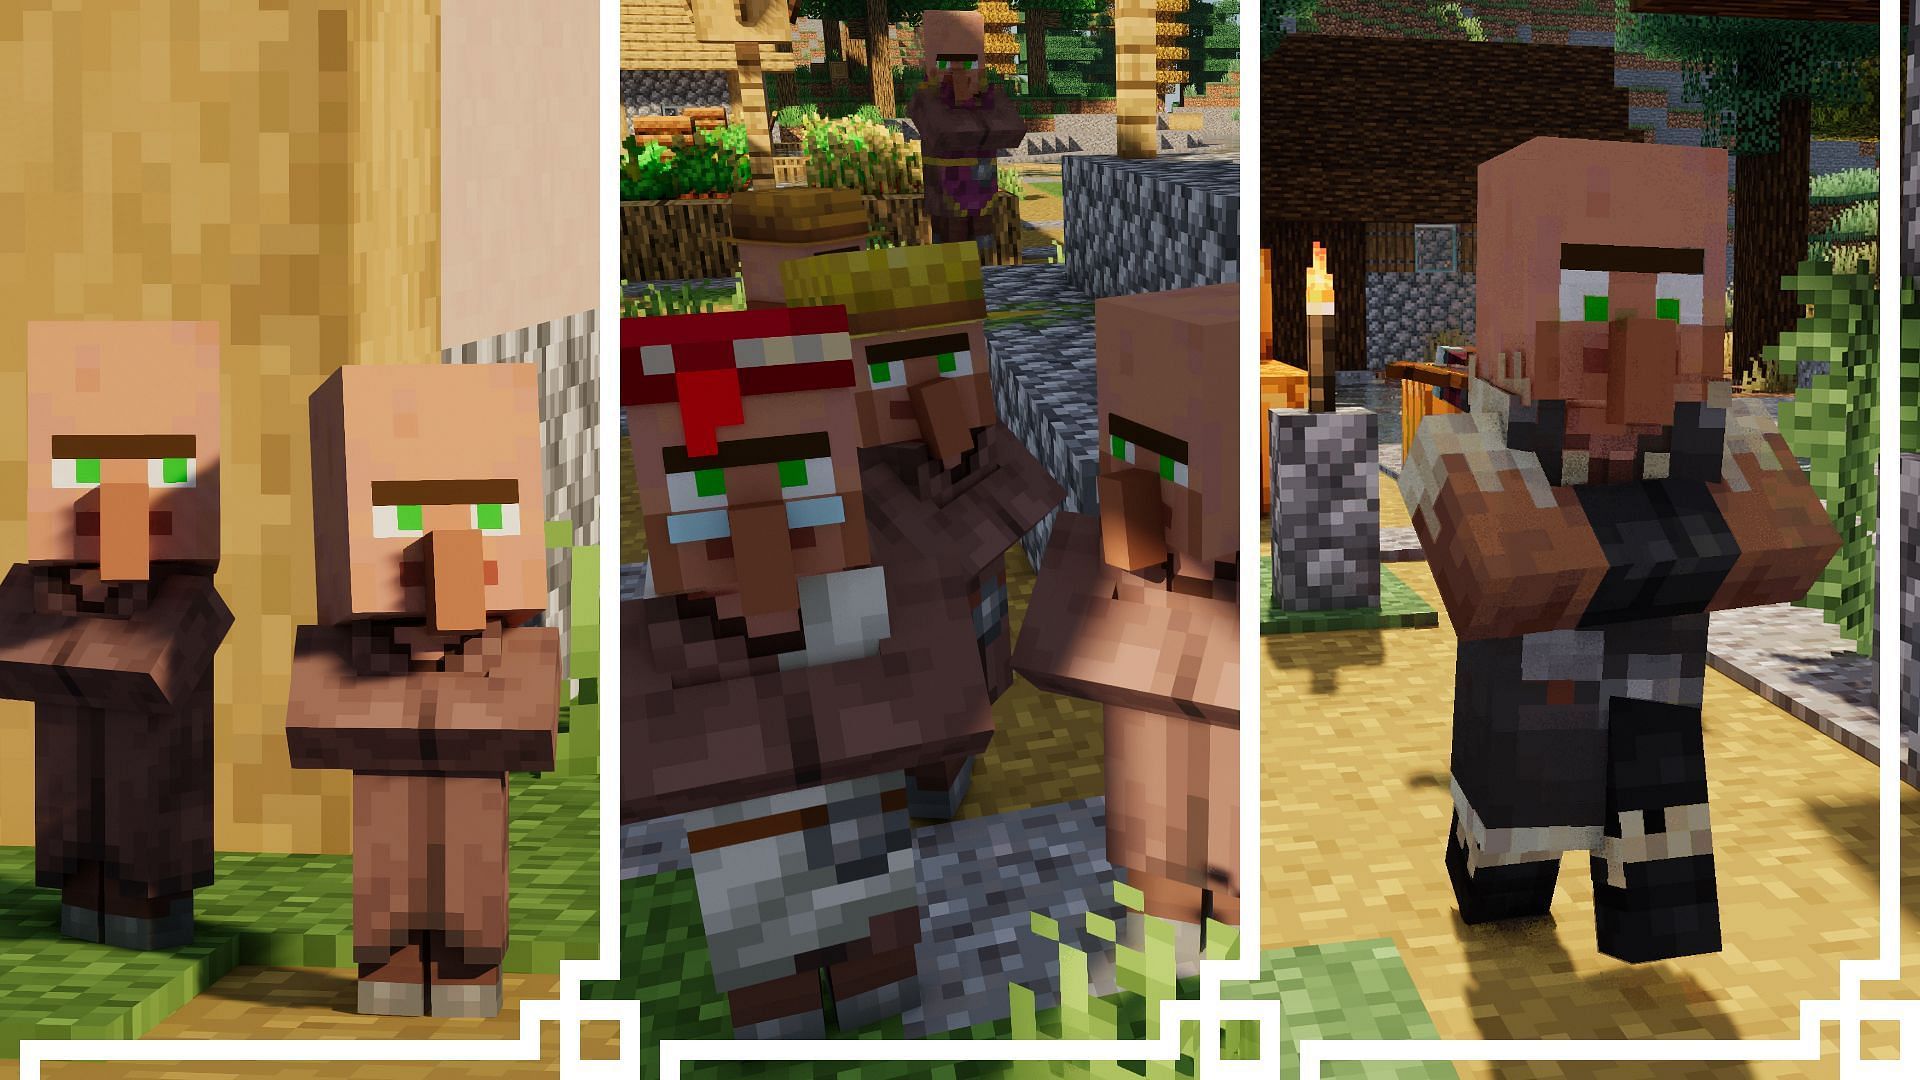 Villagers and other mobs will come alive through this texture pack (Image via CurseForge)